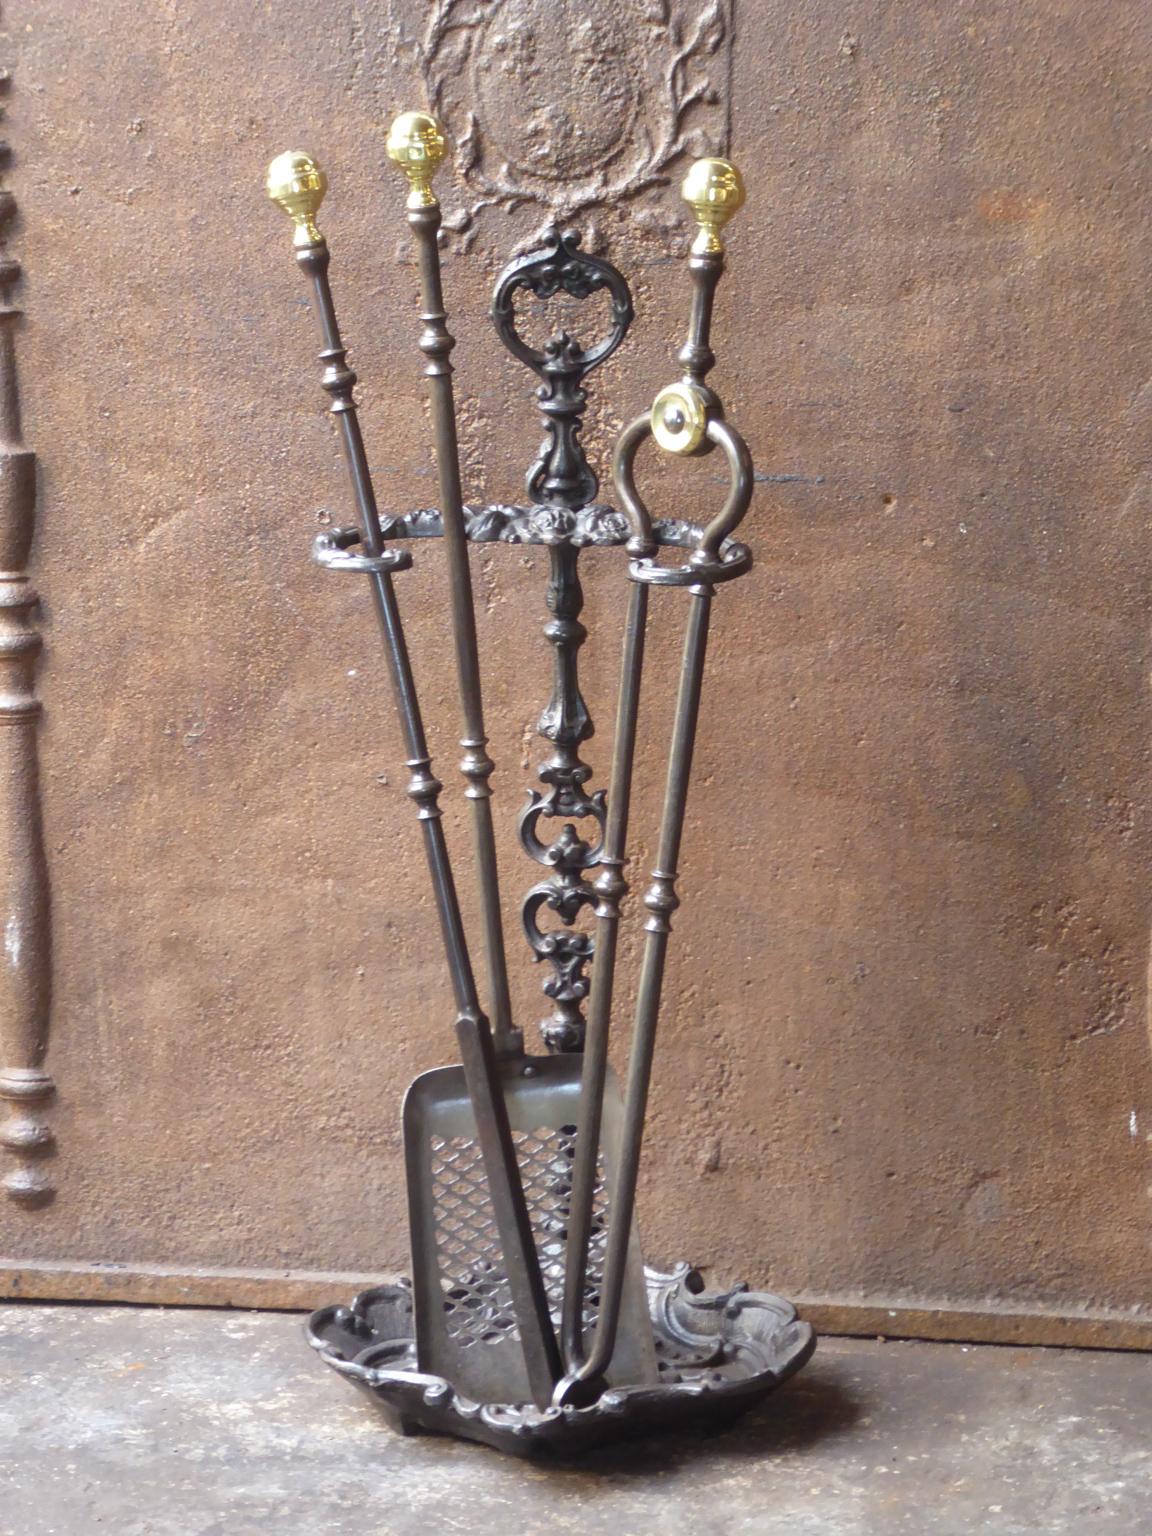 Beautiful set of three Georgian fireplace tools made of forged iron with polished brass handles and a cast iron stand. Made in England, 18th-19th century. The fire tool set is in a good condition and is fully functional.








